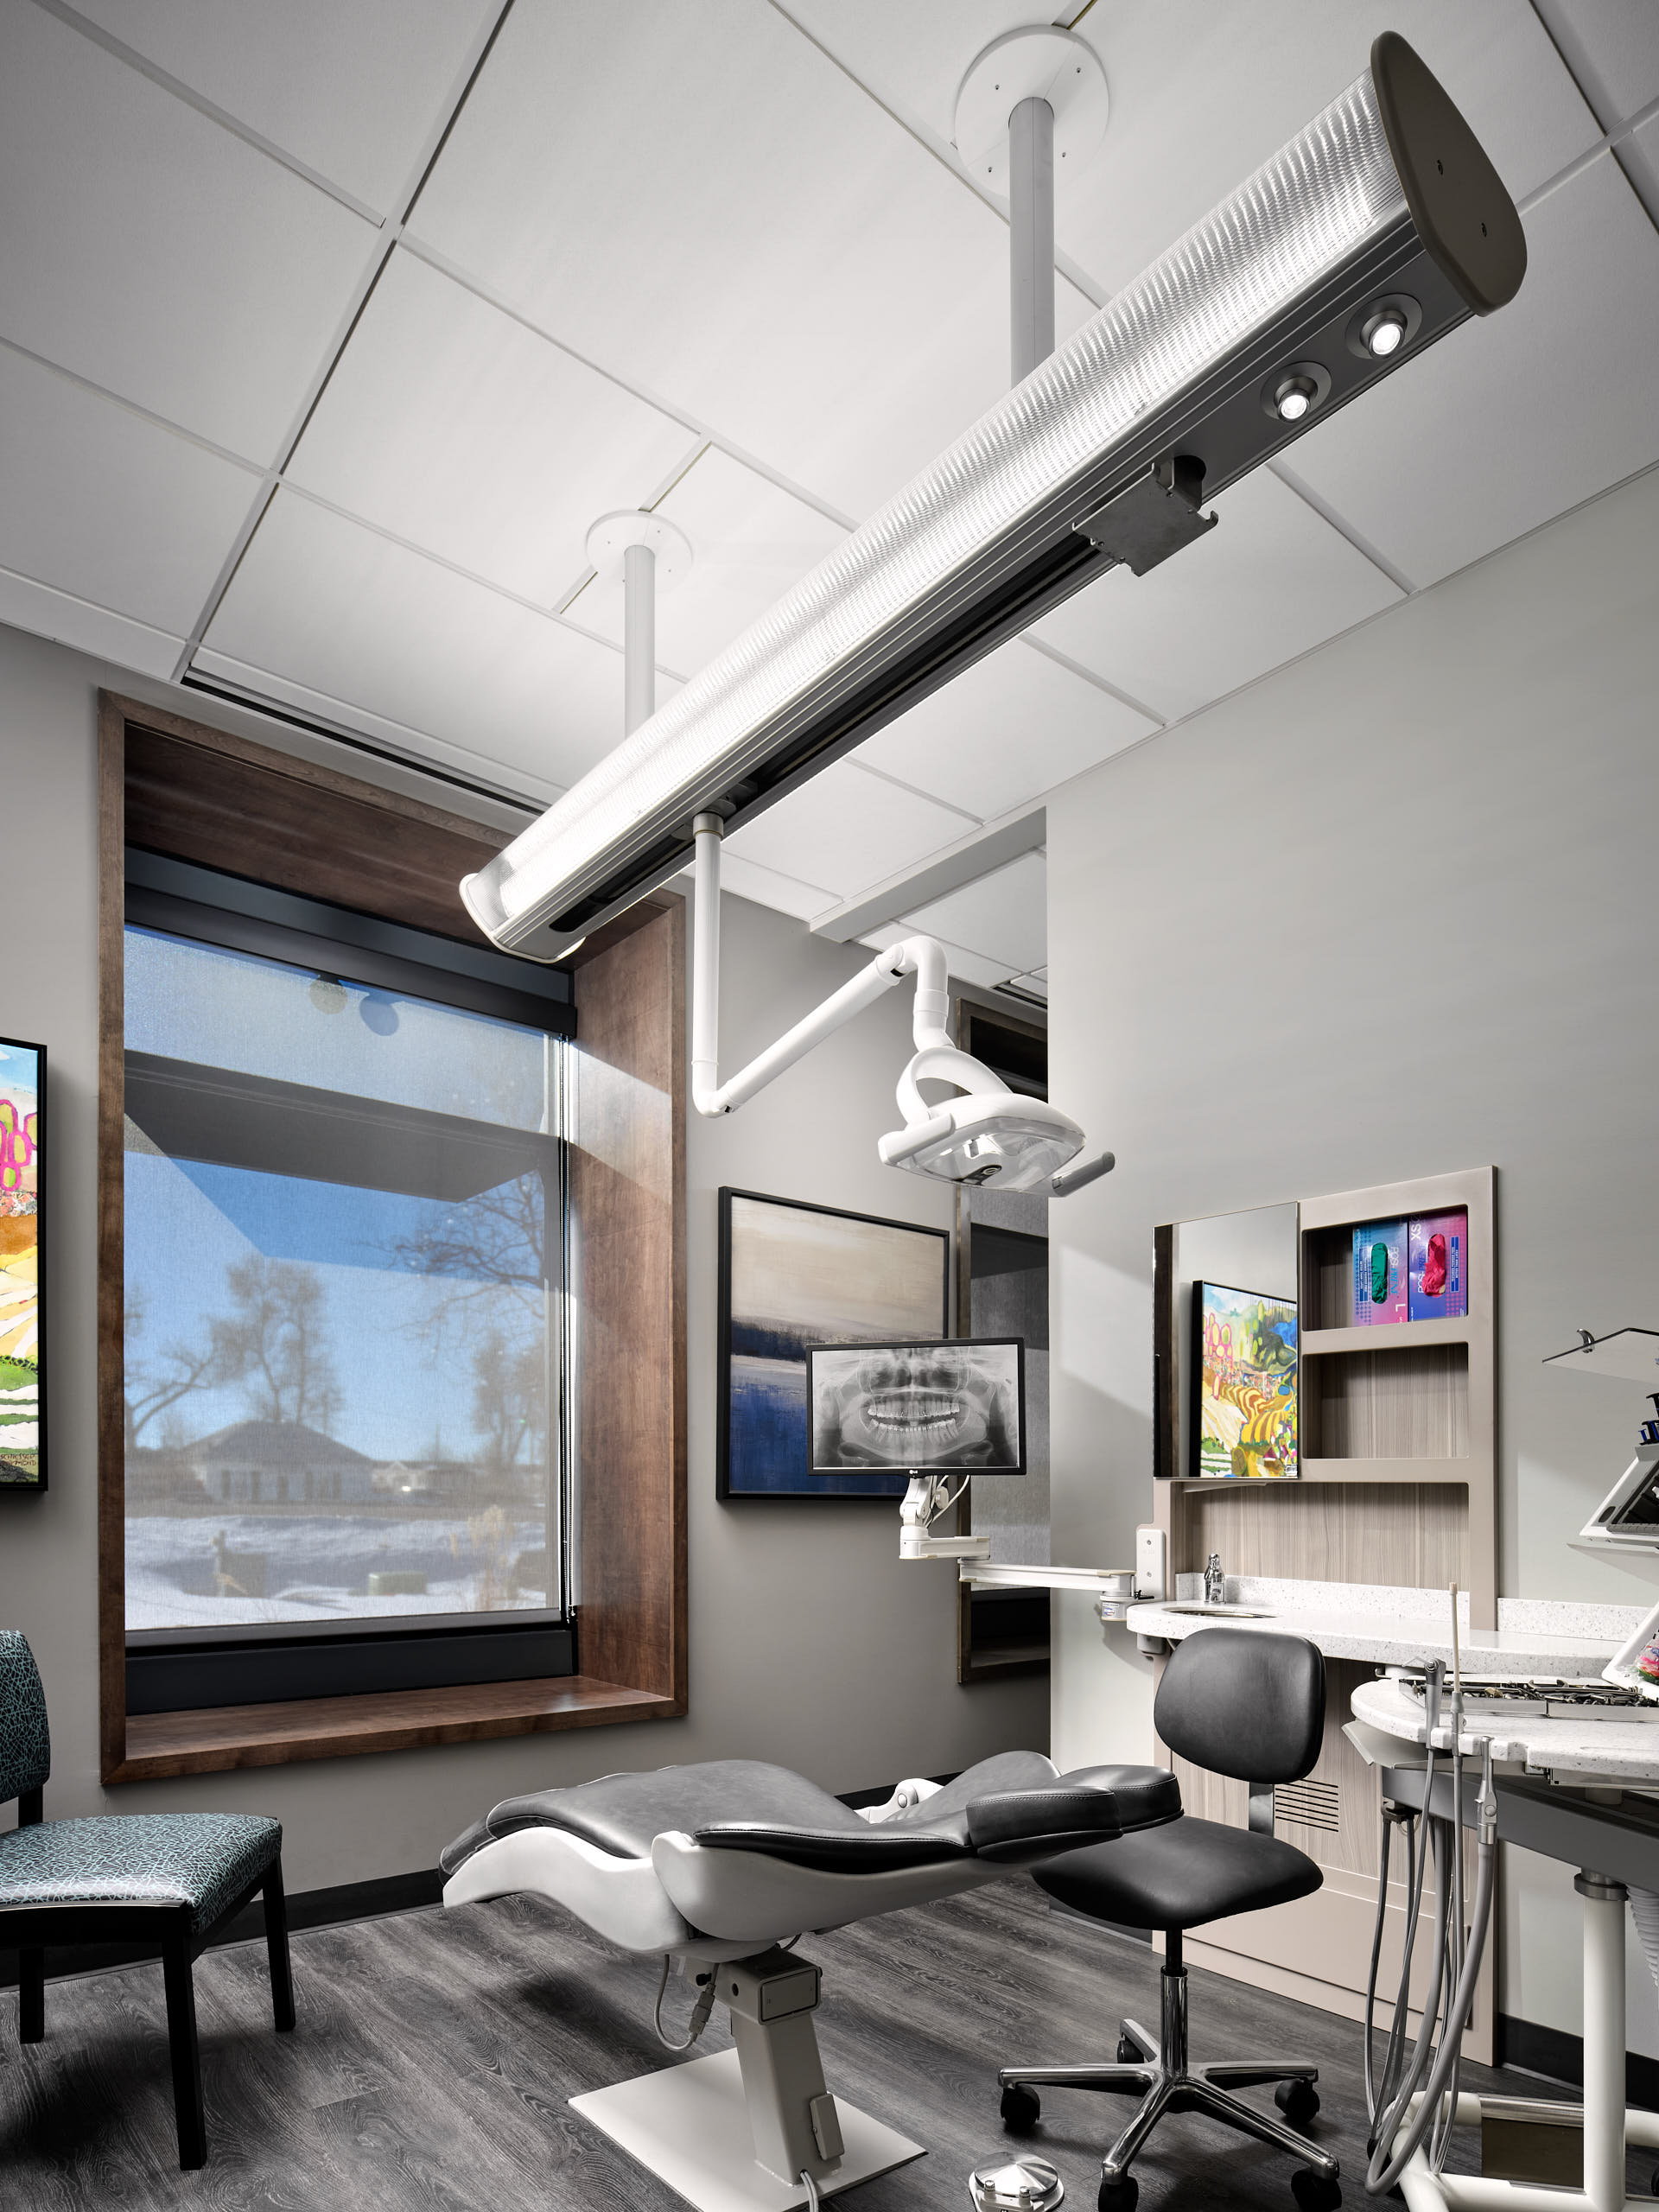 Commercial interior photography by Warren Diggles. 2 point perspective of Richter Orthodontics treatment room. Project by Design Ergonomics, VFLA Architects, and Elder Construction.